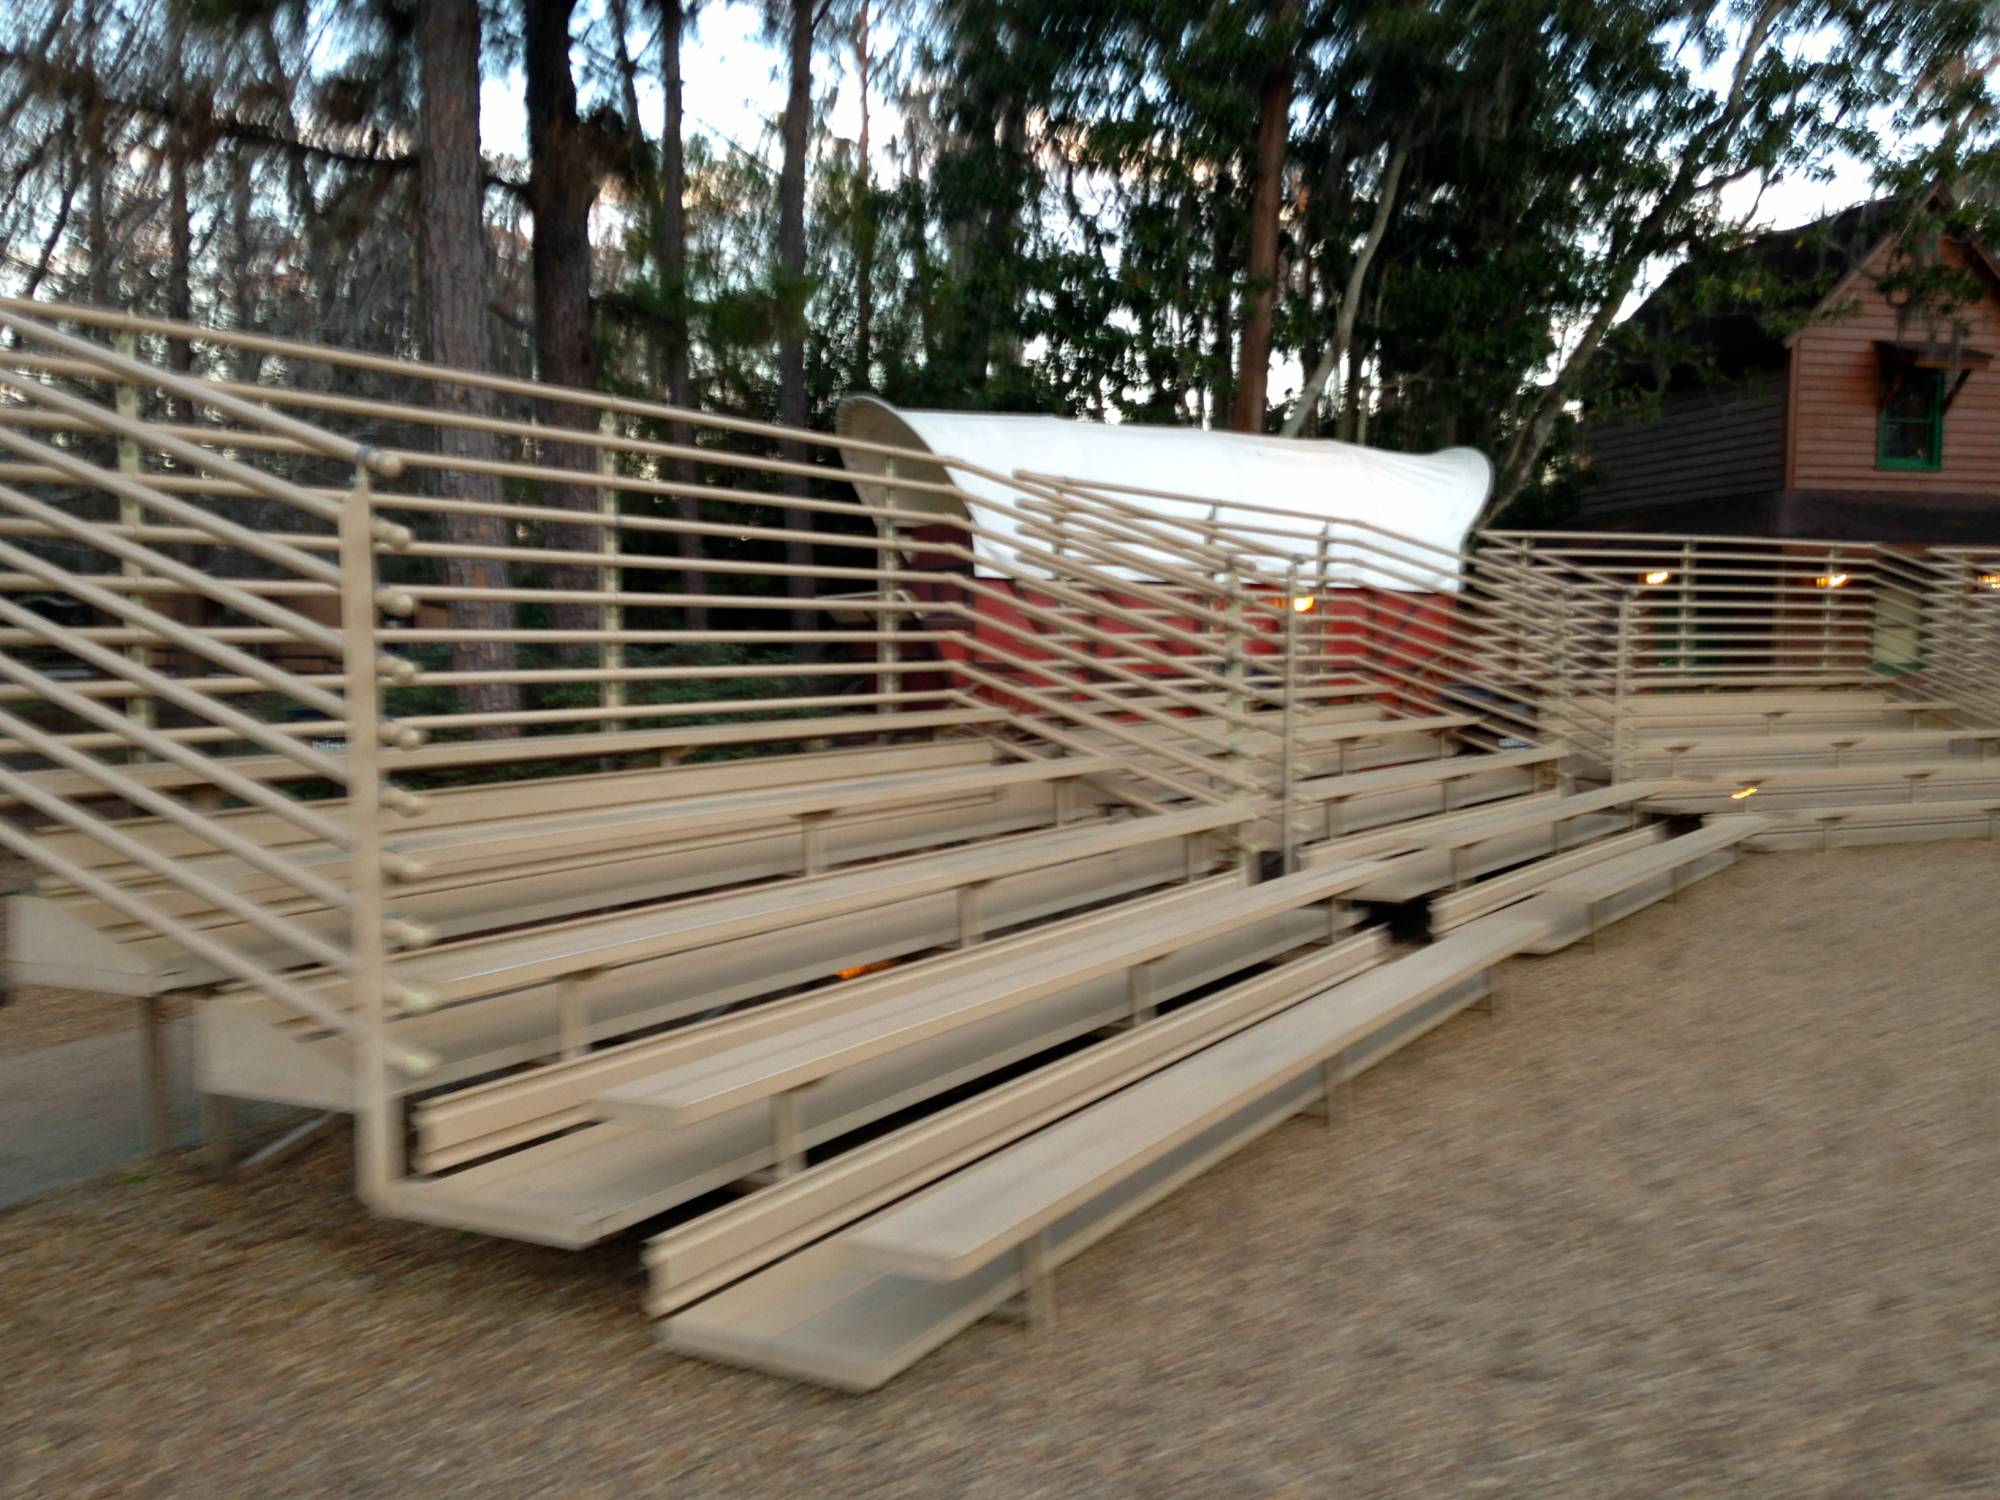 Bleachers at Chip 'n Dale's Campfire Sing-a-long at Fort Wilderness